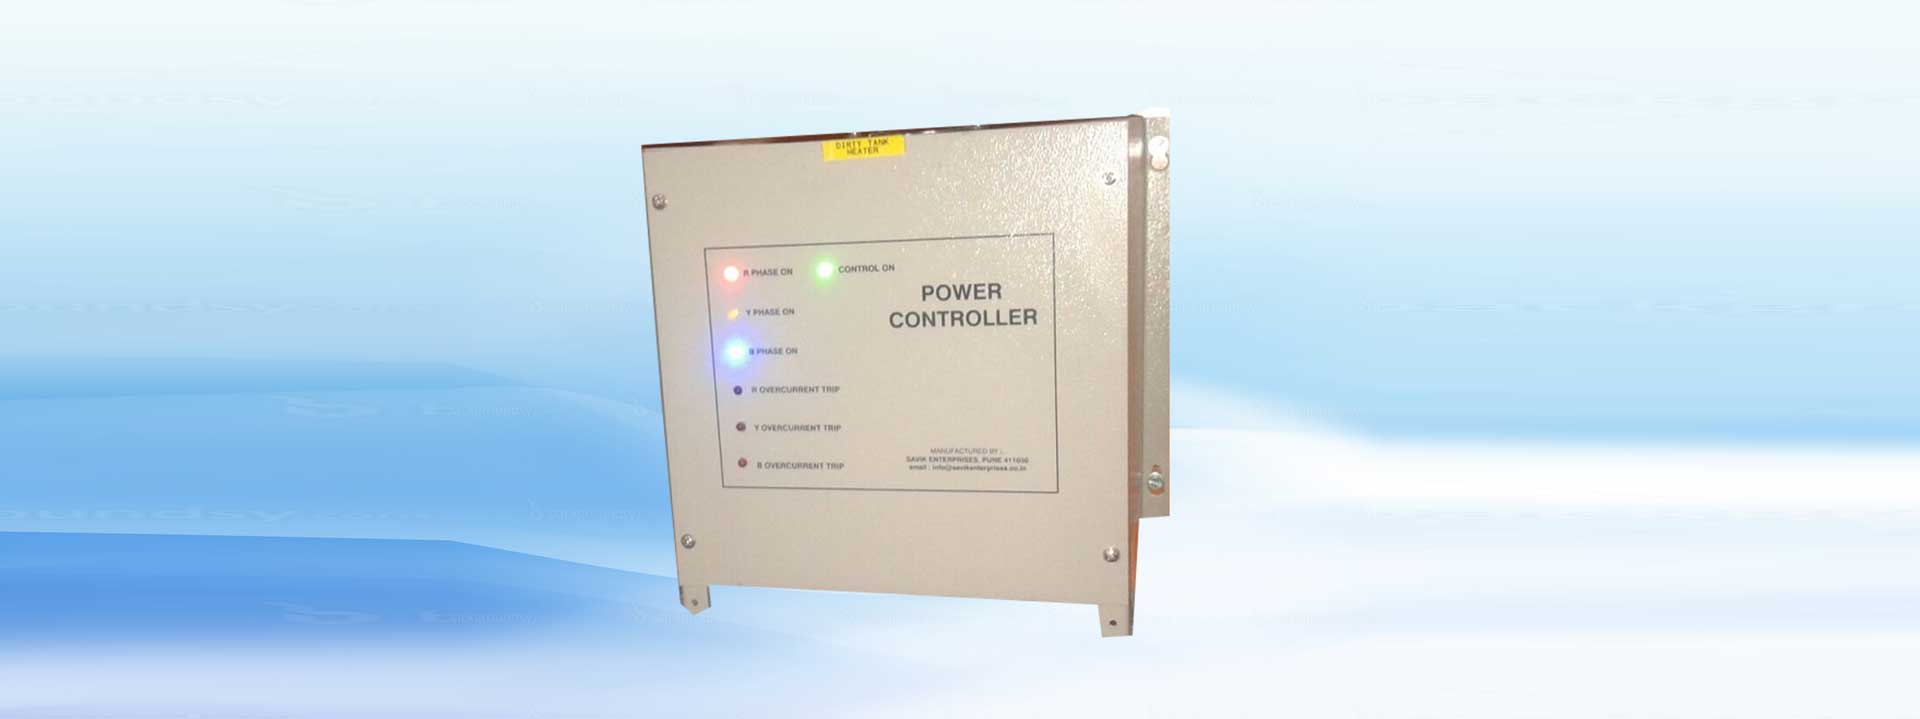 Savik Enterprises, Senadatta Peth, Pune |Manufacturer and Suppliers of Solid State relay and Intensity Controllers  